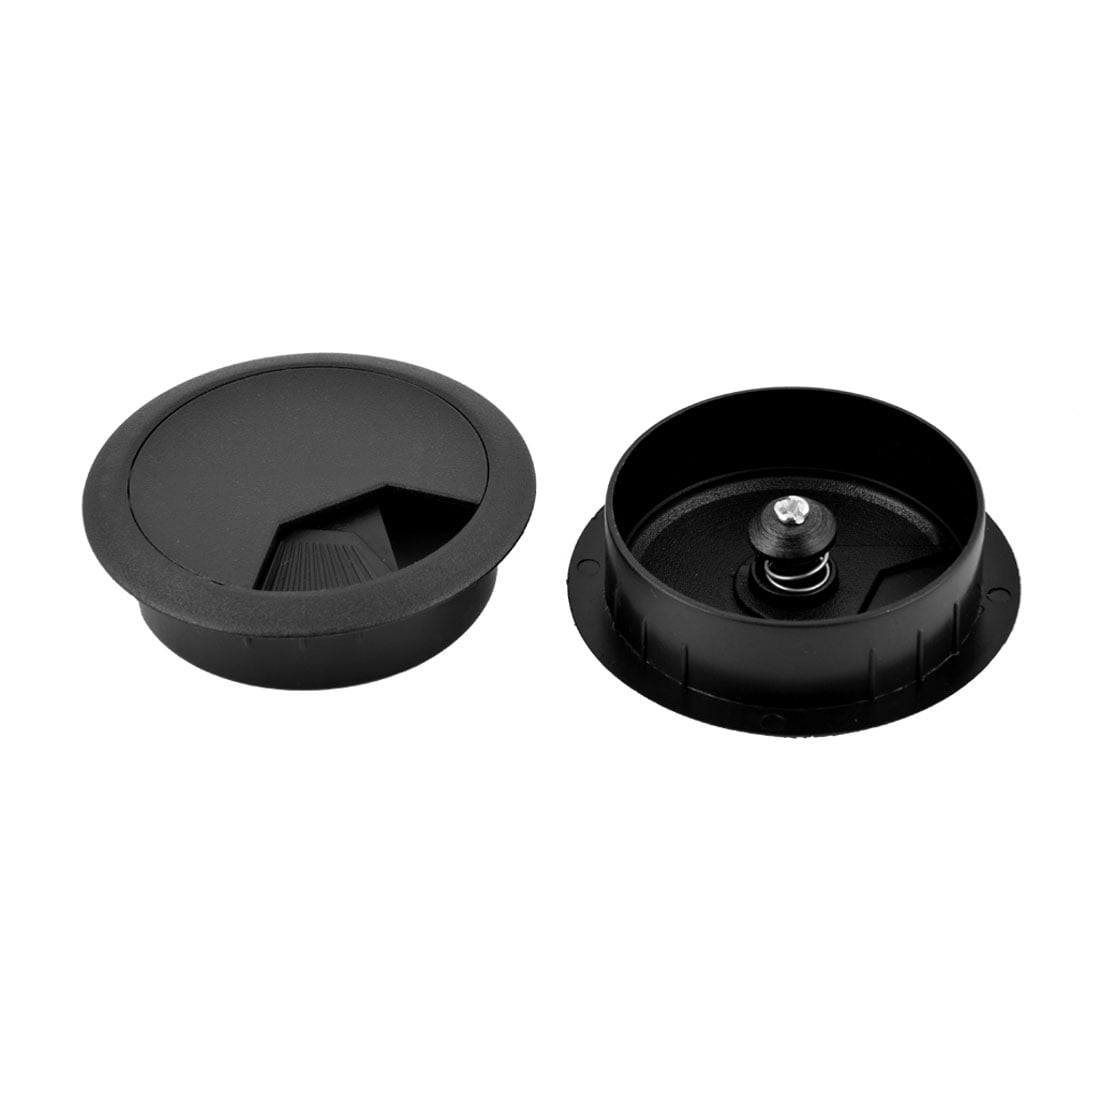 60mm Cable Tidy Discs for Office/School Desks and Media Units 2X Dark Brown Desk Grommets